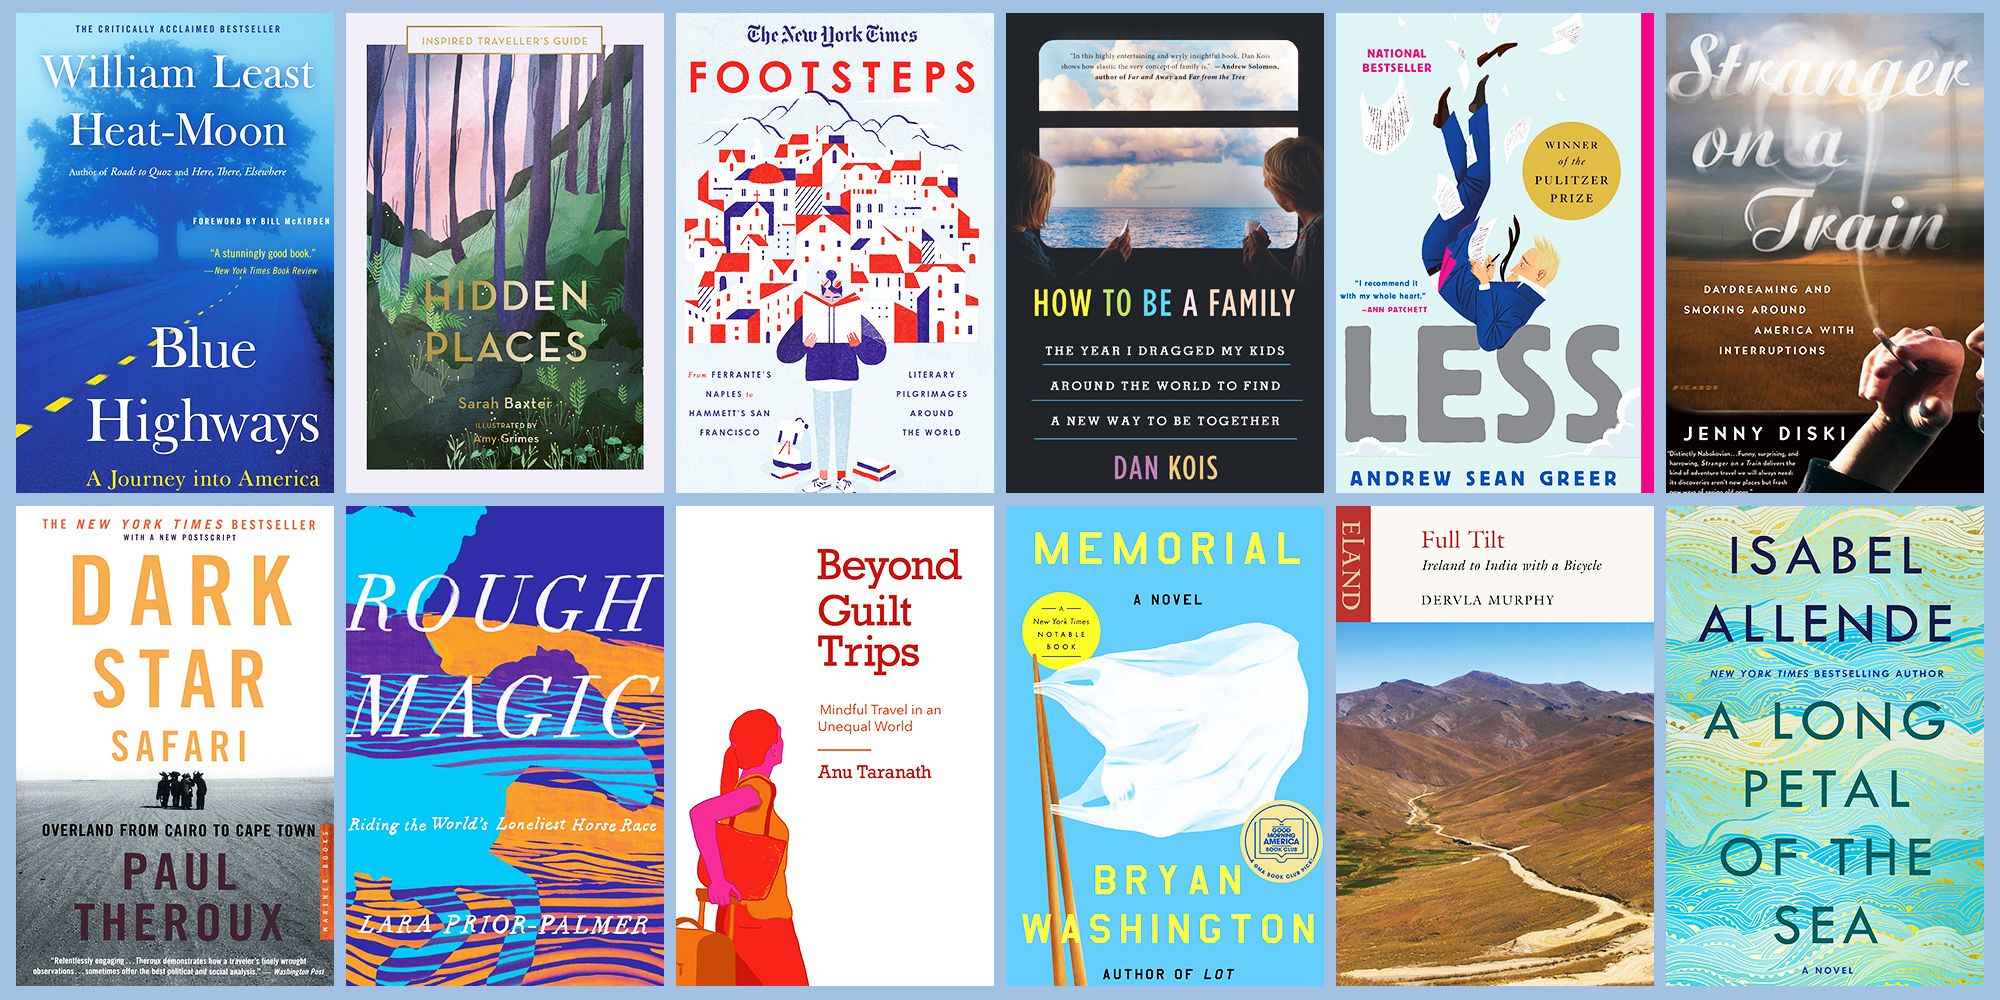 Best Travel Books to Inspire, Educate & Prepare for Your Vacation